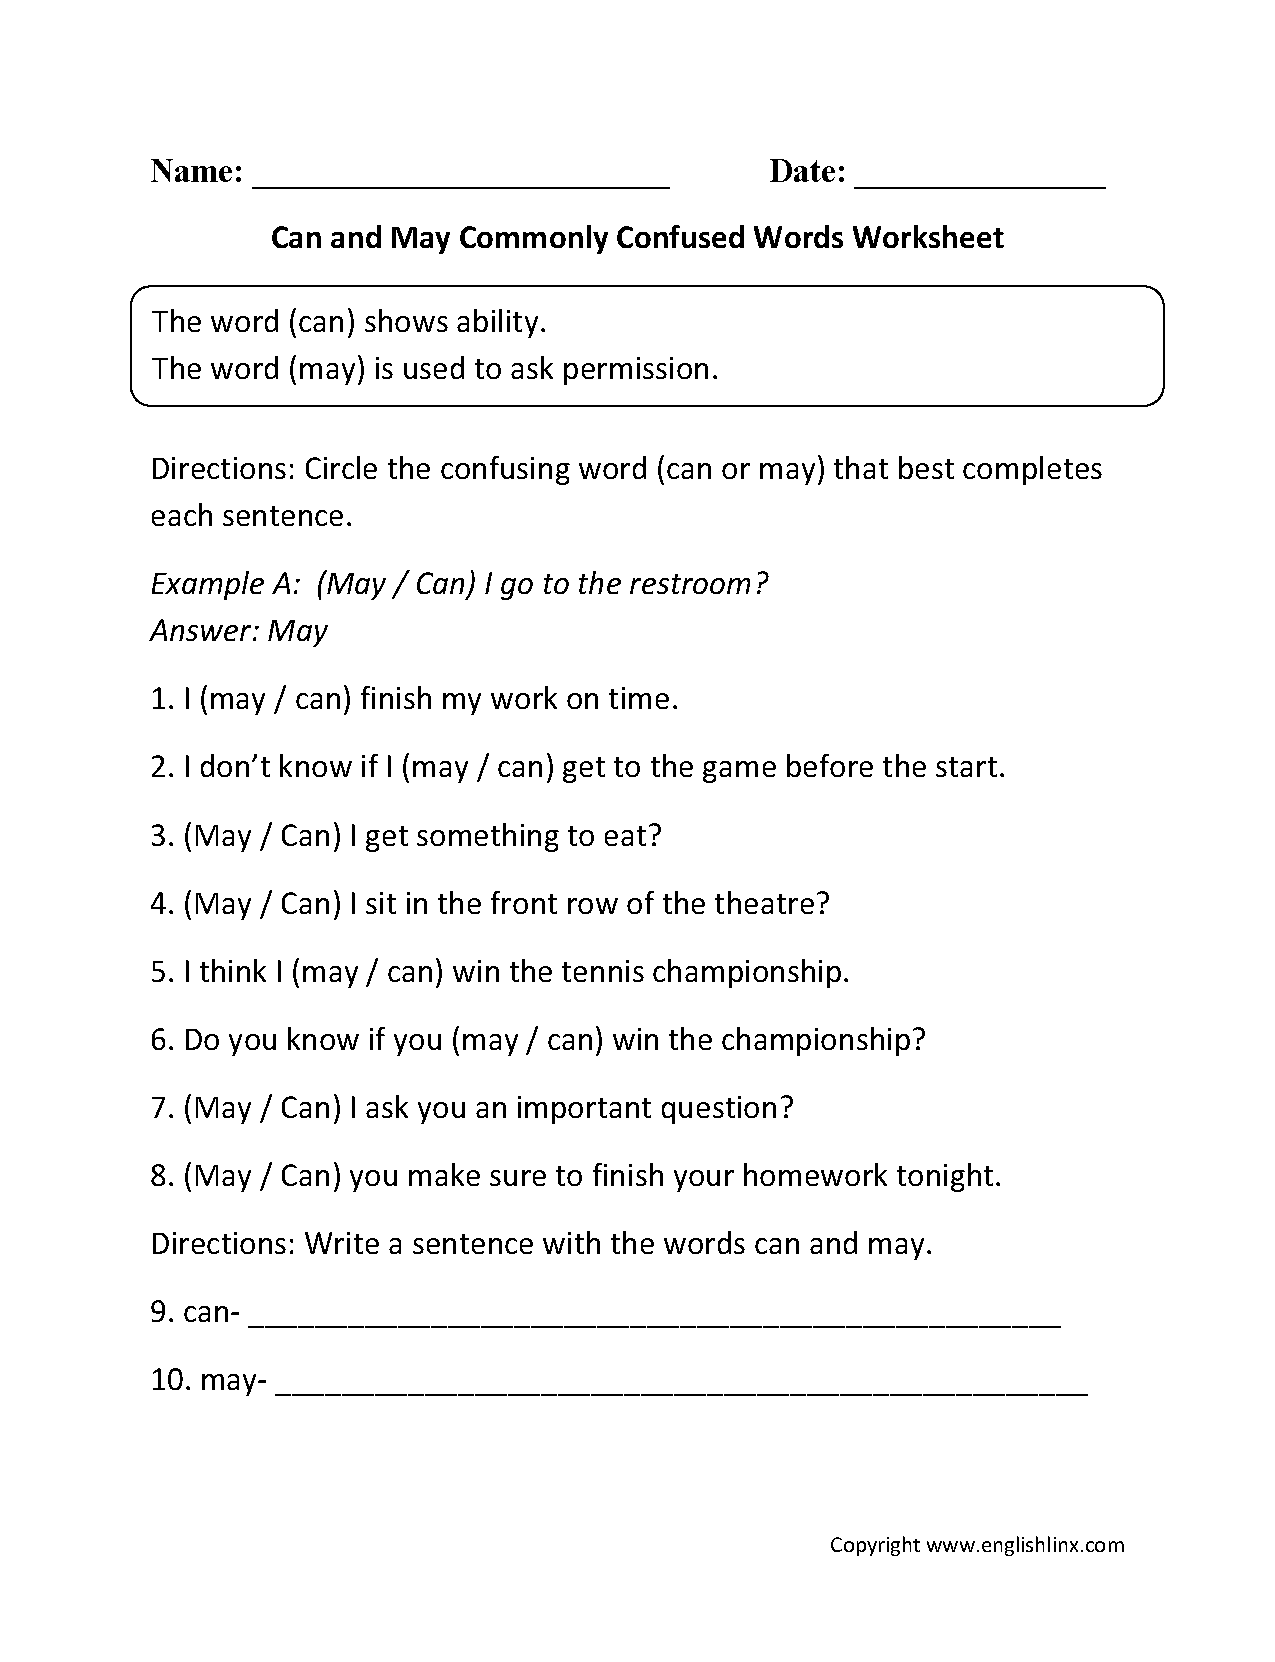 Can and May Commonly Confused Words Worksheets